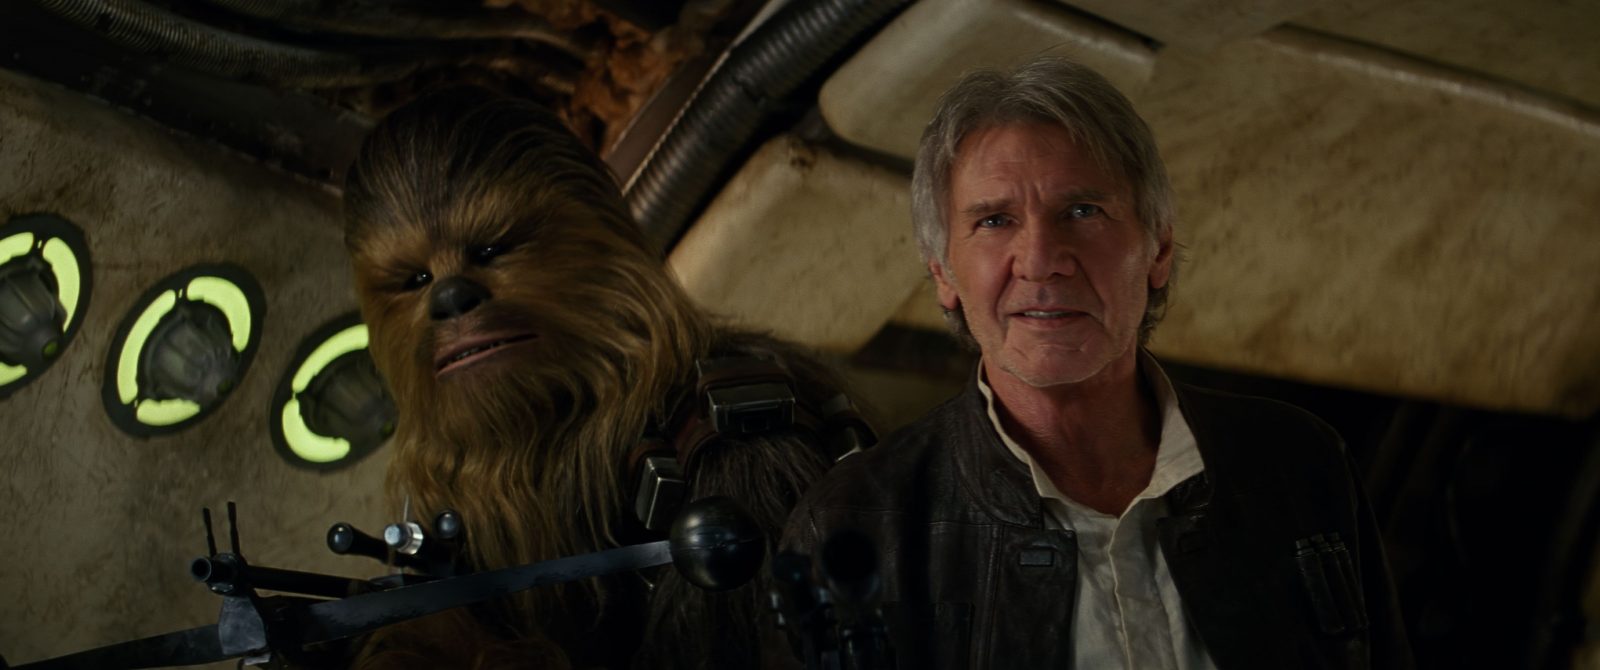 Star Wars VII The Force Awakens 32 - Chewie and Han are home